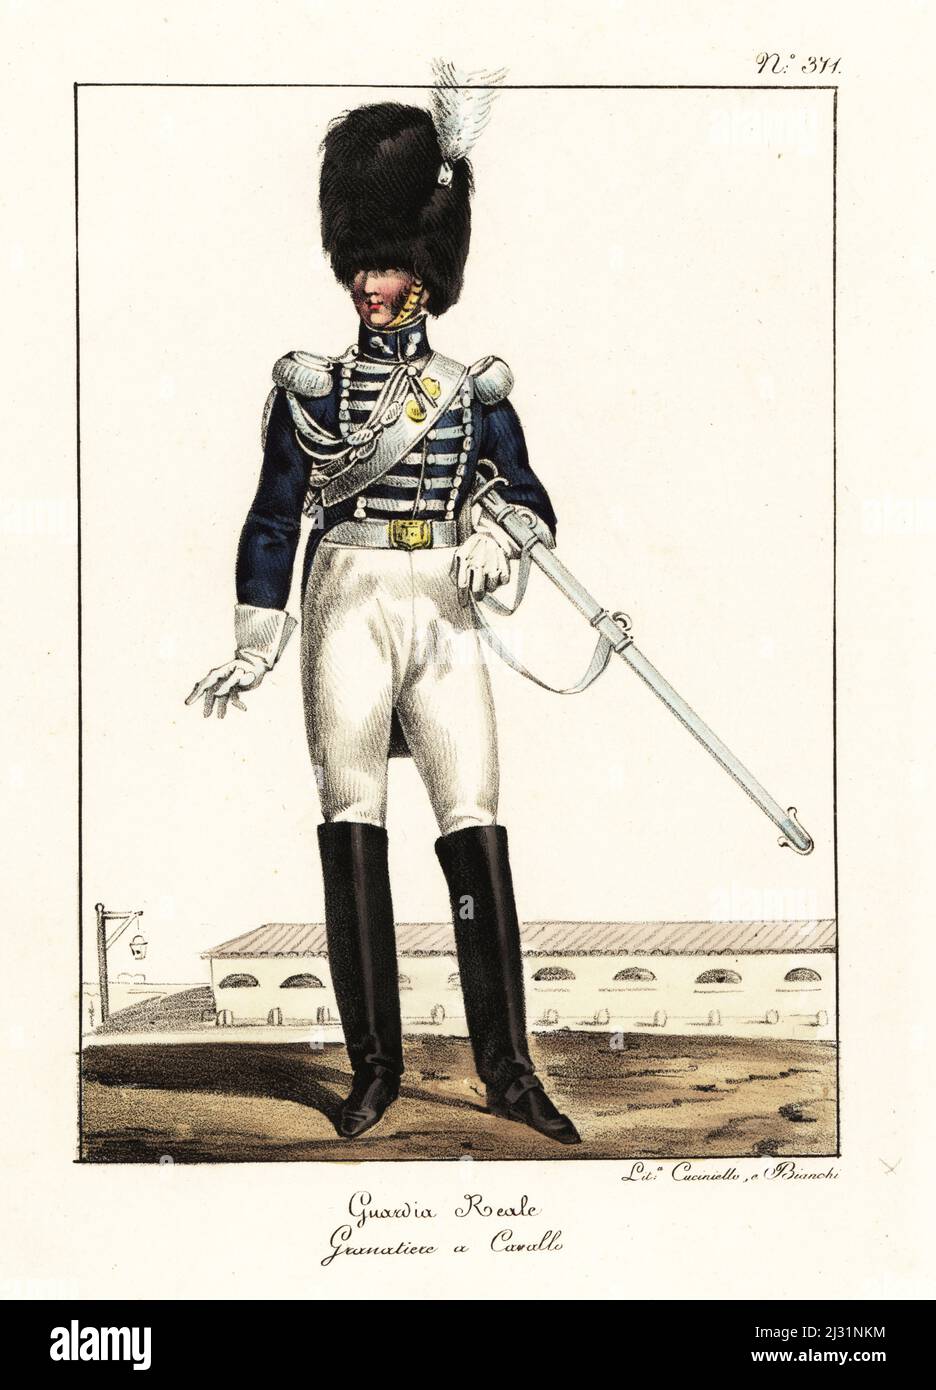 Mounted Grenadier of the French Royal Guard, Bourbon Restoration. In bearskin with brush, blue coat with white epaulettes and frogging, breeches, boots, armed with sword. Garde Royale, Grenadier a Cheval. Handcoloured lithograph by Lorenzo Bianchi and Domenico Cuciniello after Hippolyte Lecomte from Costumi civili e militari della monarchia francese dal 1200 al 1820, Naples, 1825. Italian edition of Lecomte’s Civilian and military costumes of the French monarchy from 1200 to 1820. Stock Photo